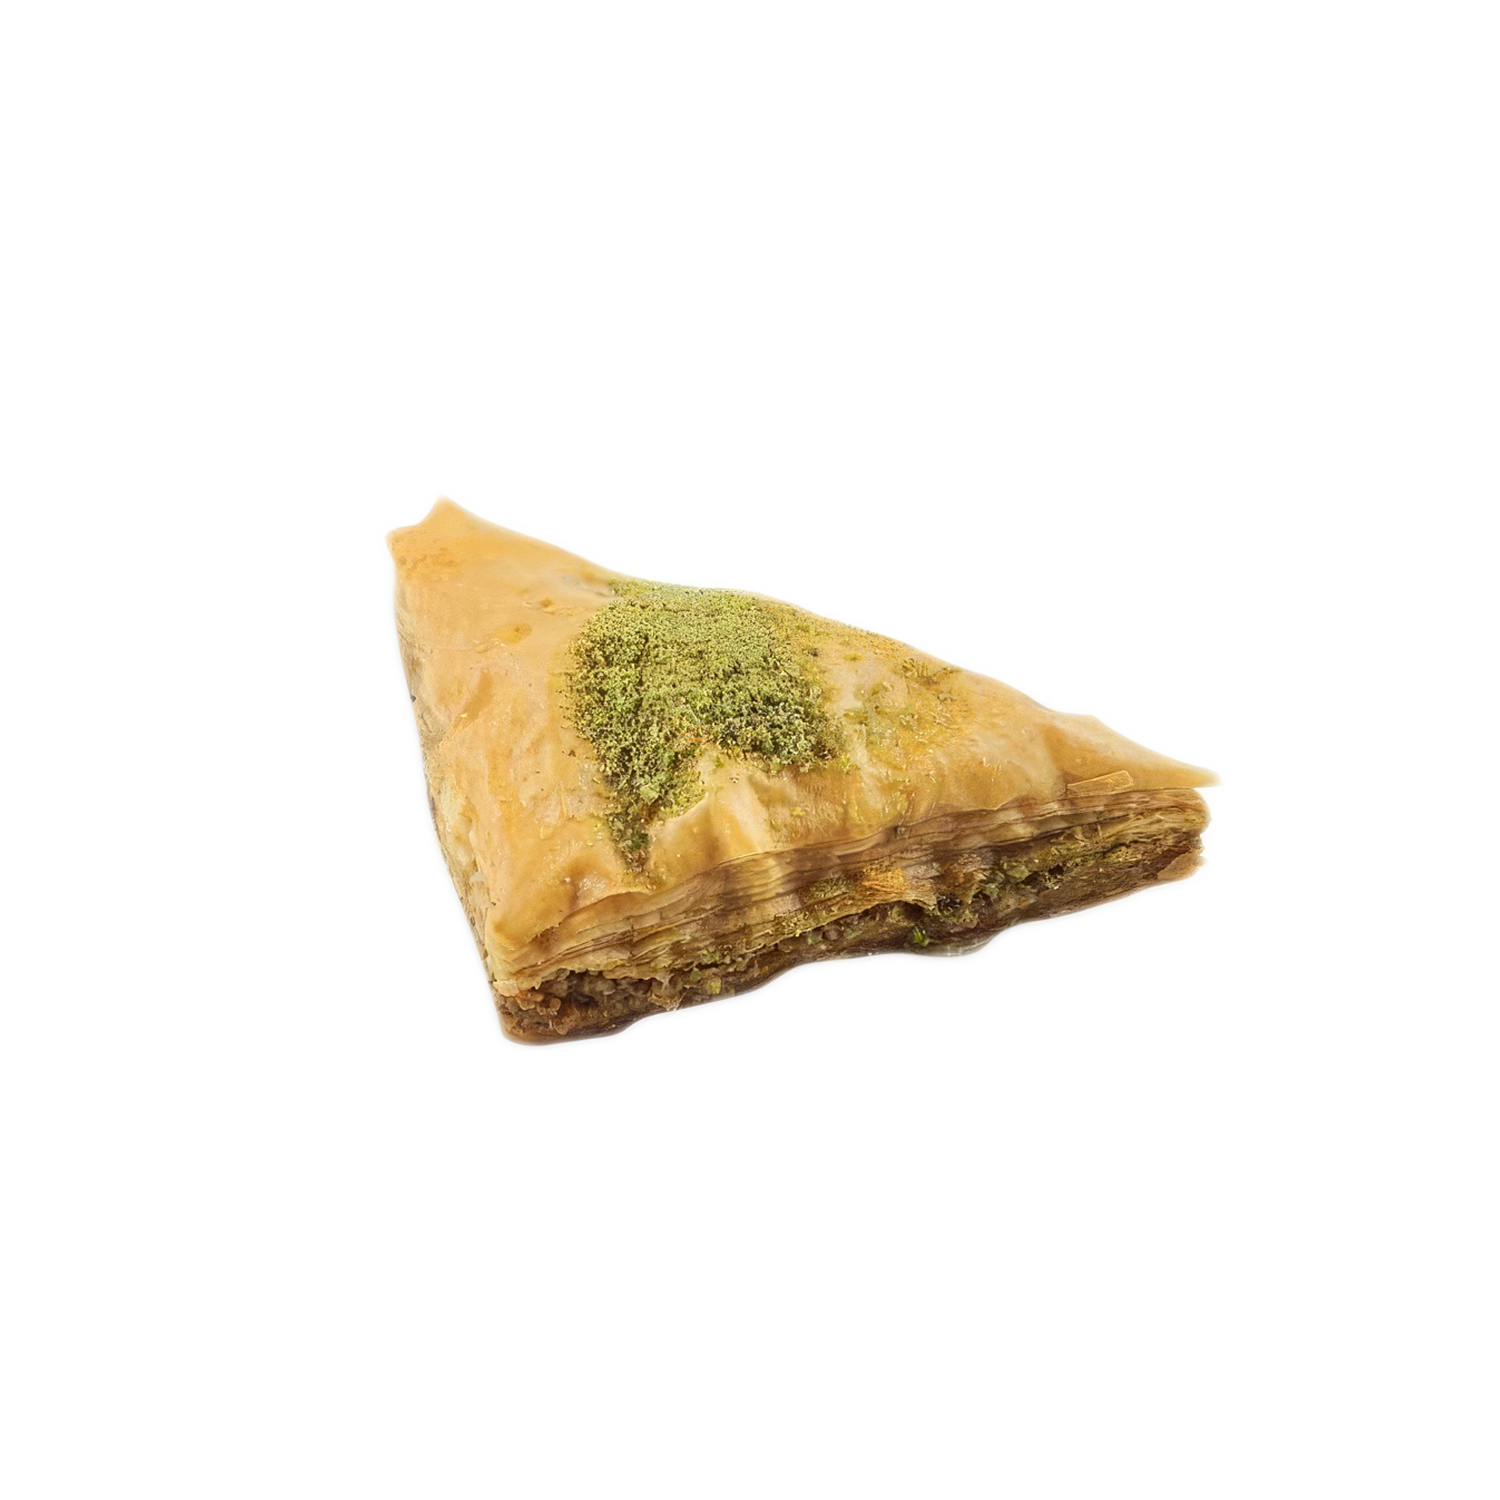 Layered baklava triangle on a plate.